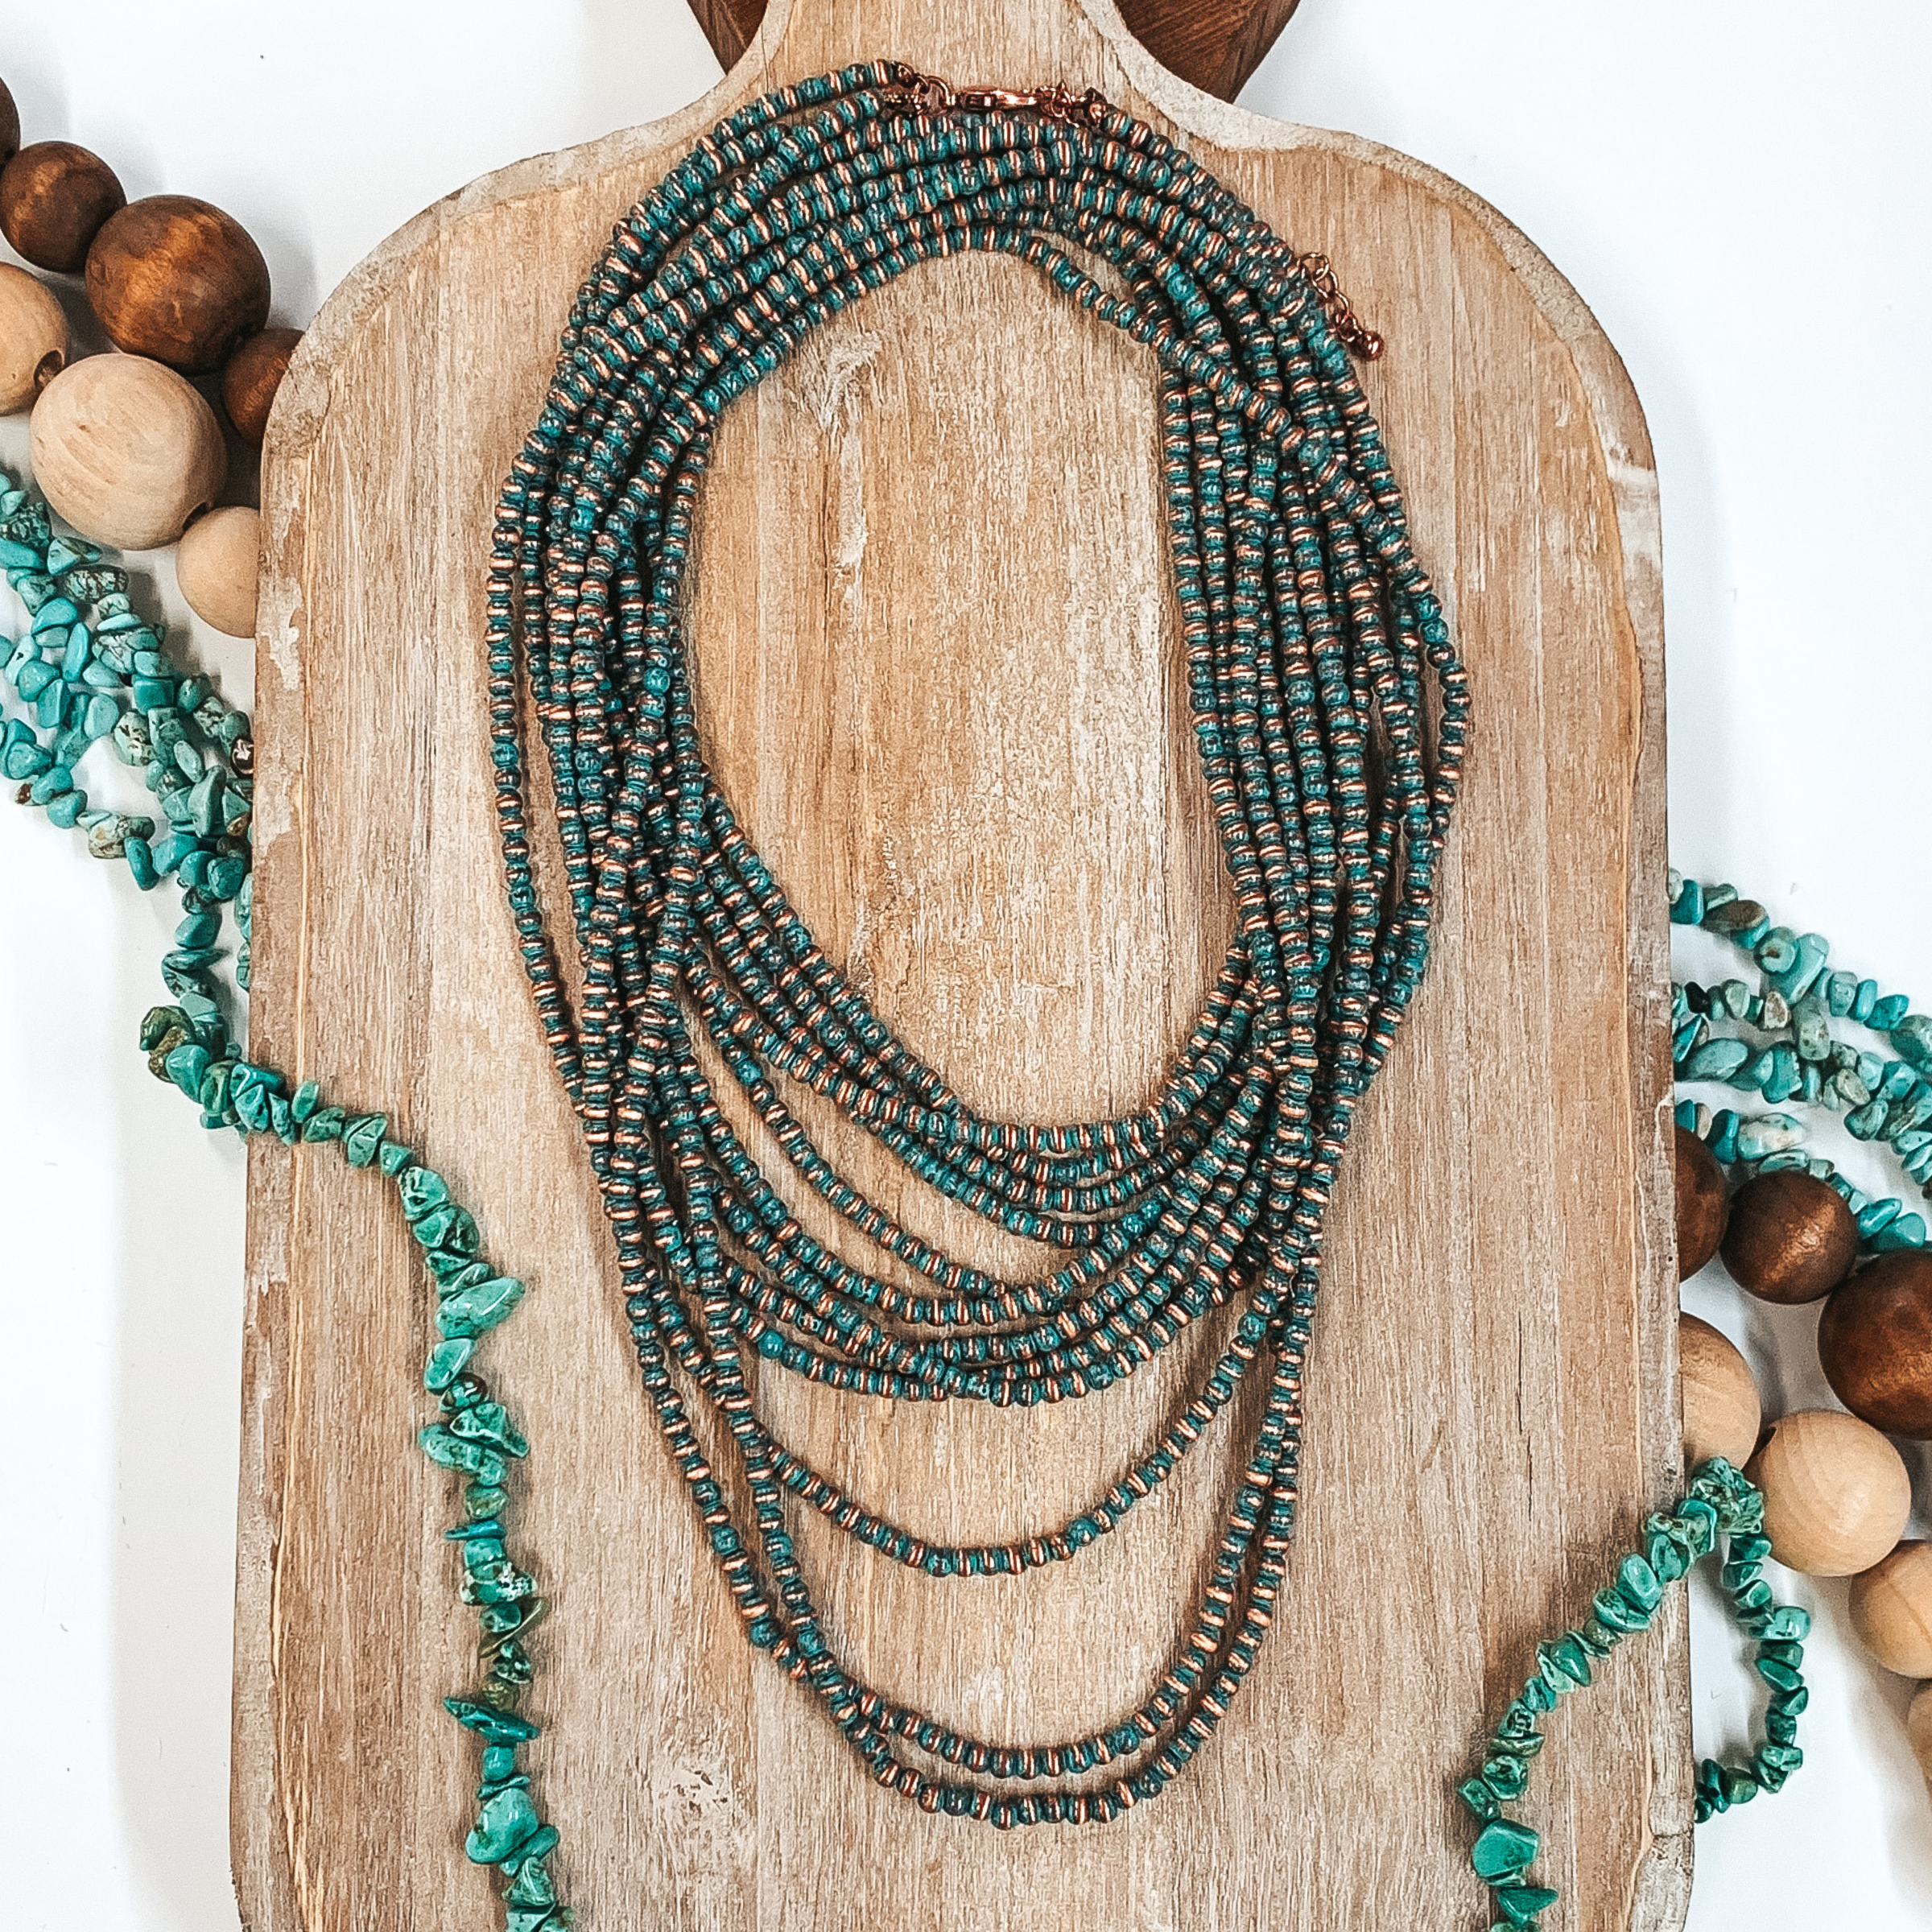 Three Strands of Long Faux Navajo Pearls in Patina Tone - Giddy Up Glamour Boutique